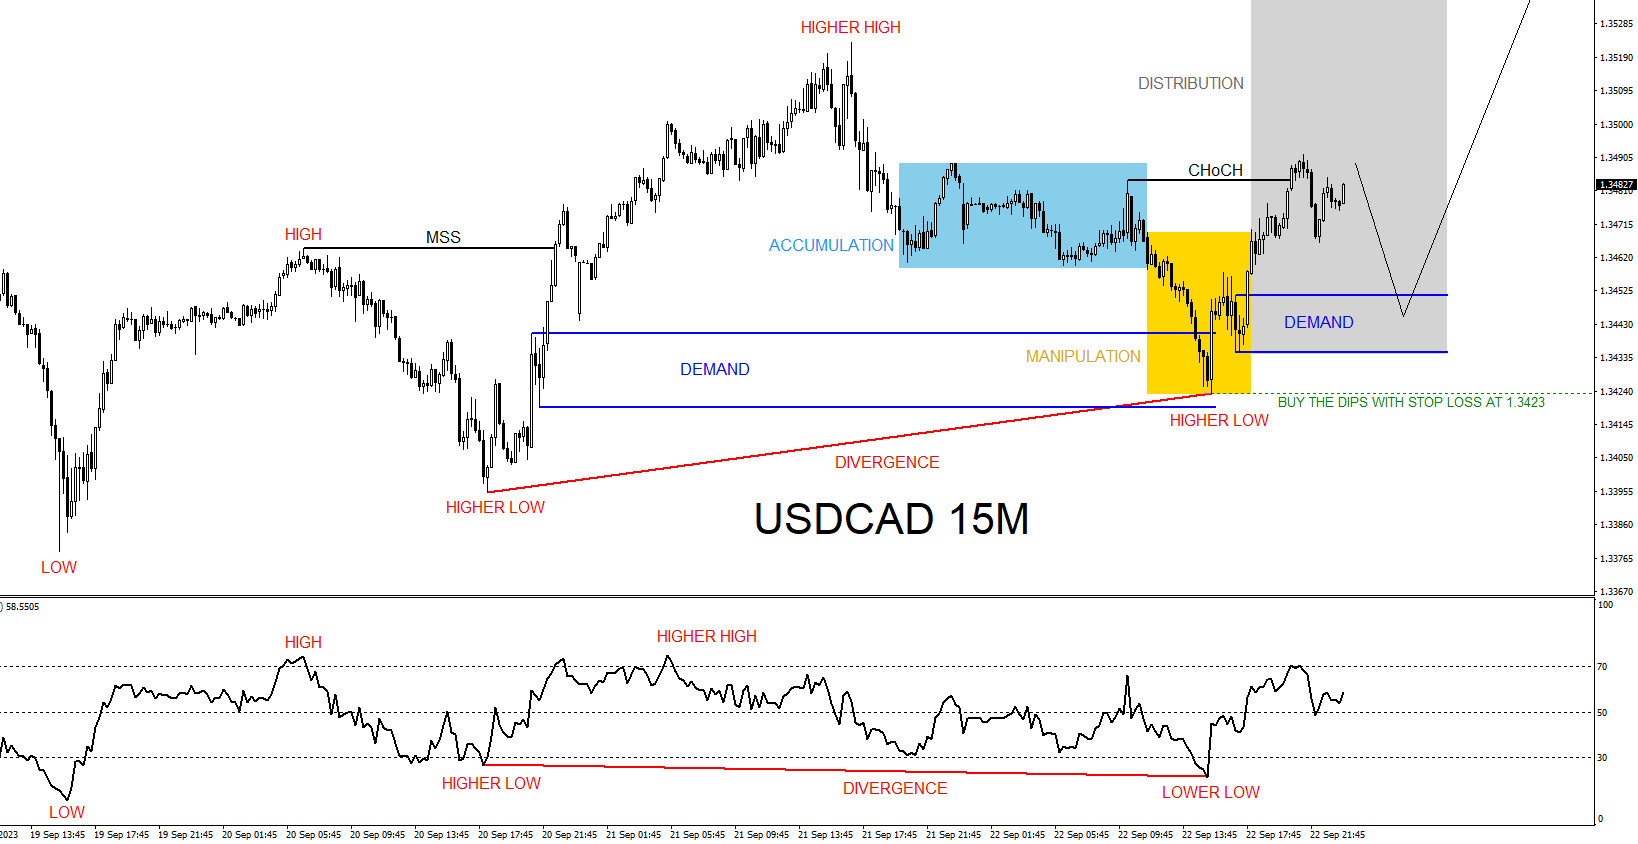 USDCAD : Catching the 80 Pip 1:4 Risk/Reward Move Higher